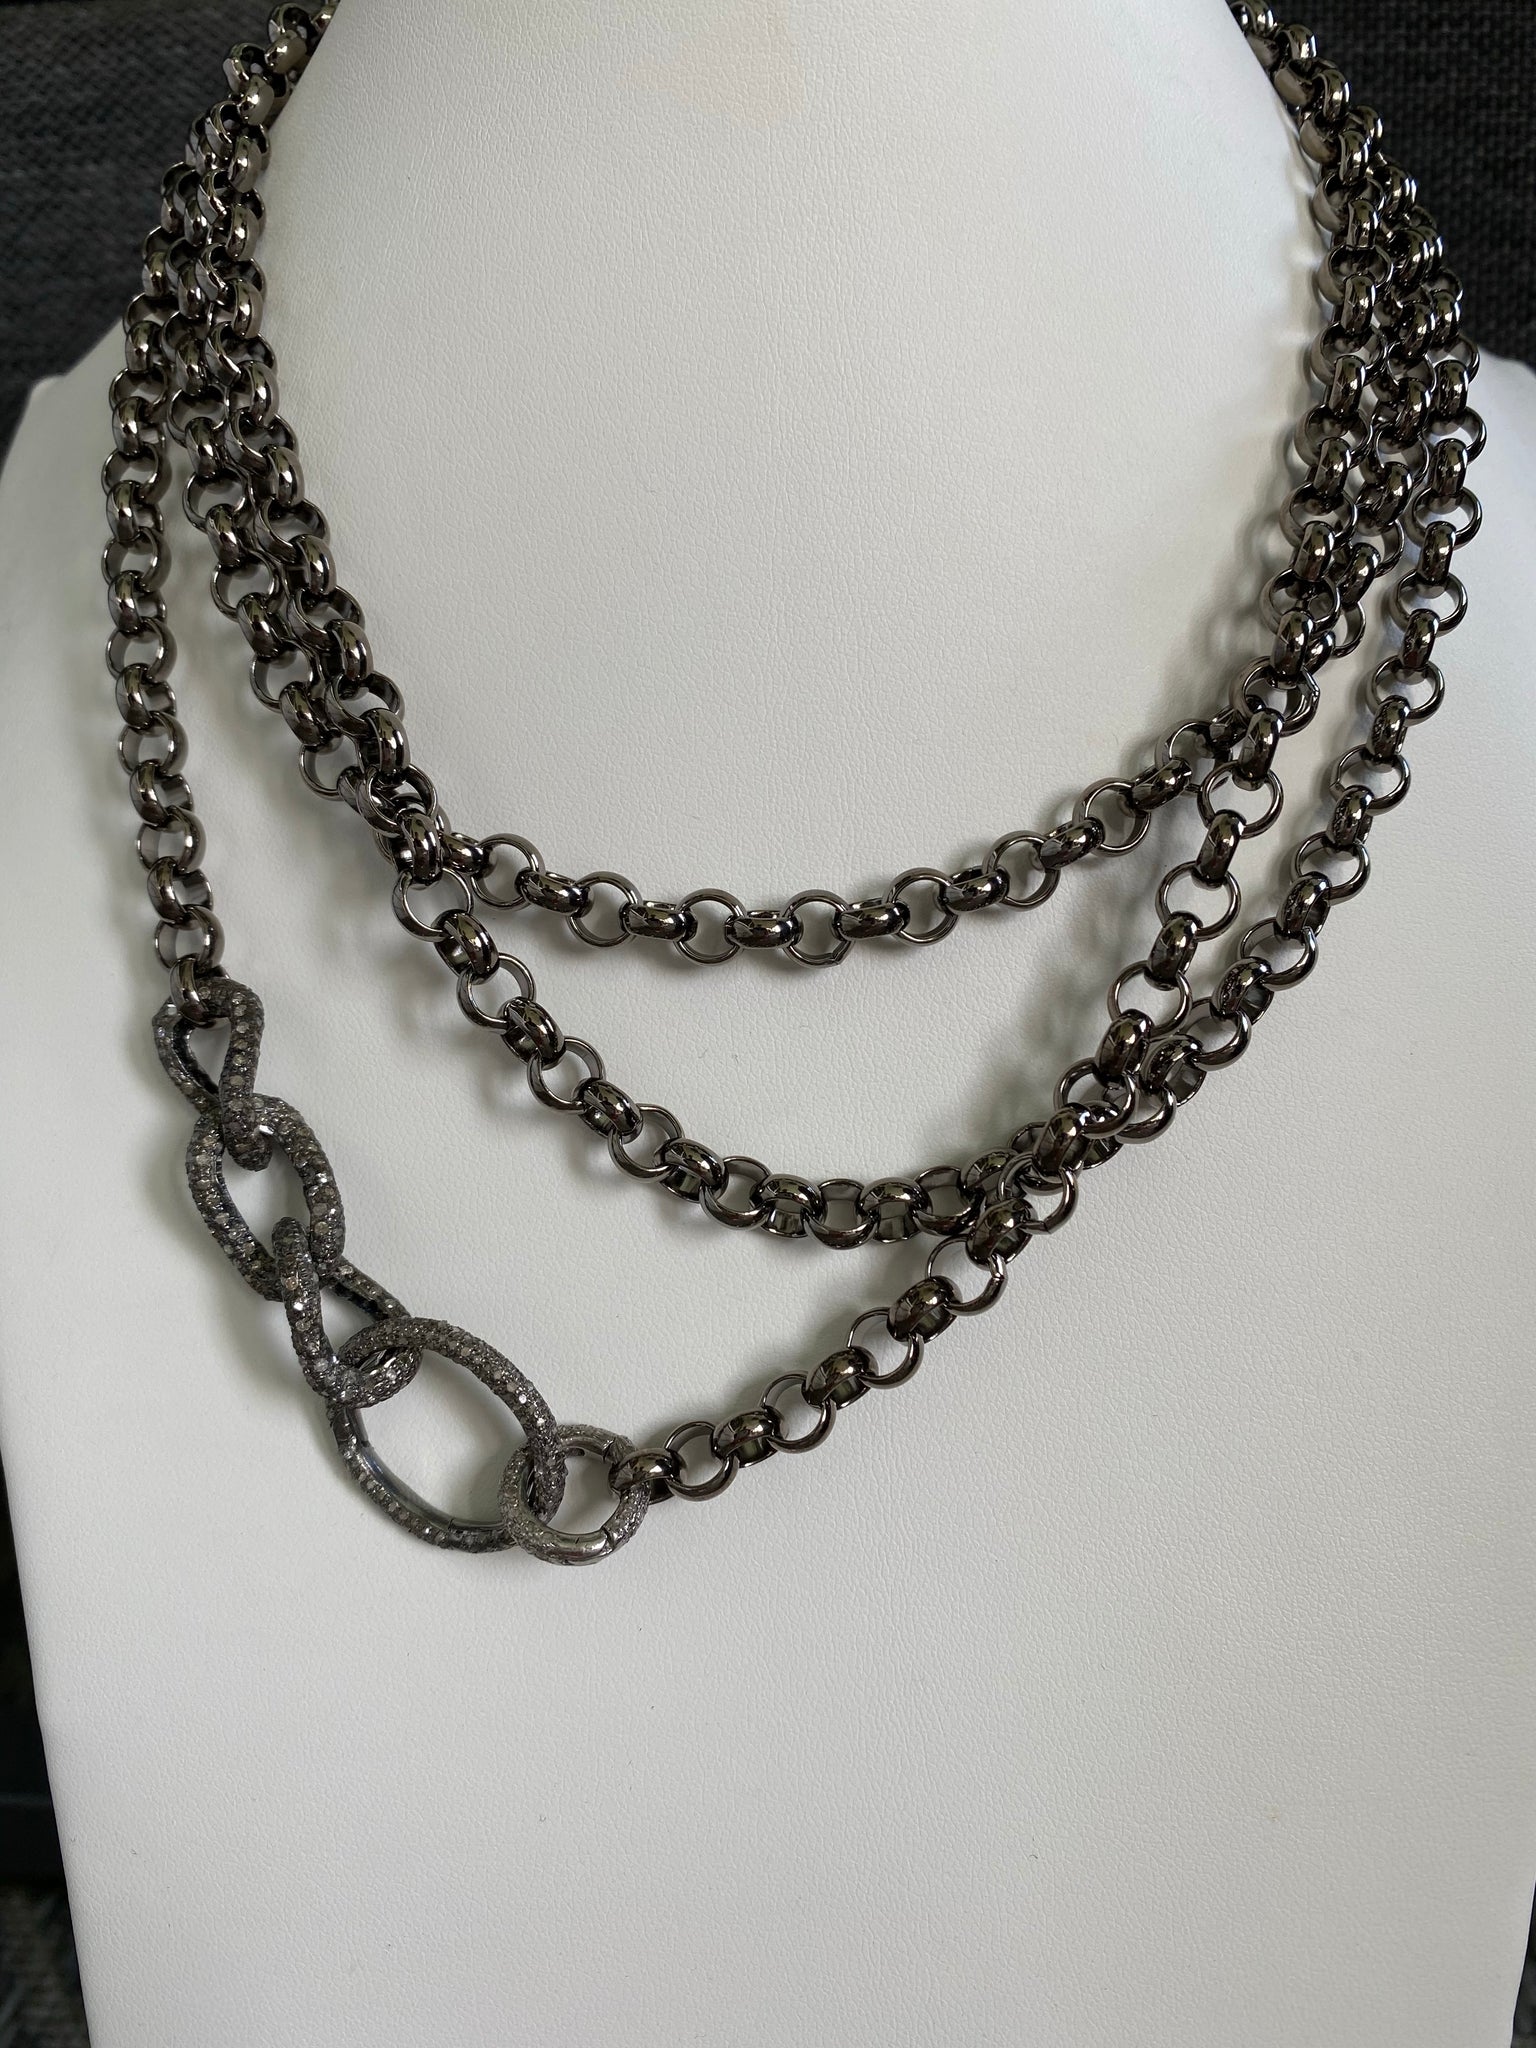 Oxidized Rolo Chain with Pave Diamond Connector, clasp and Jump Ring ...